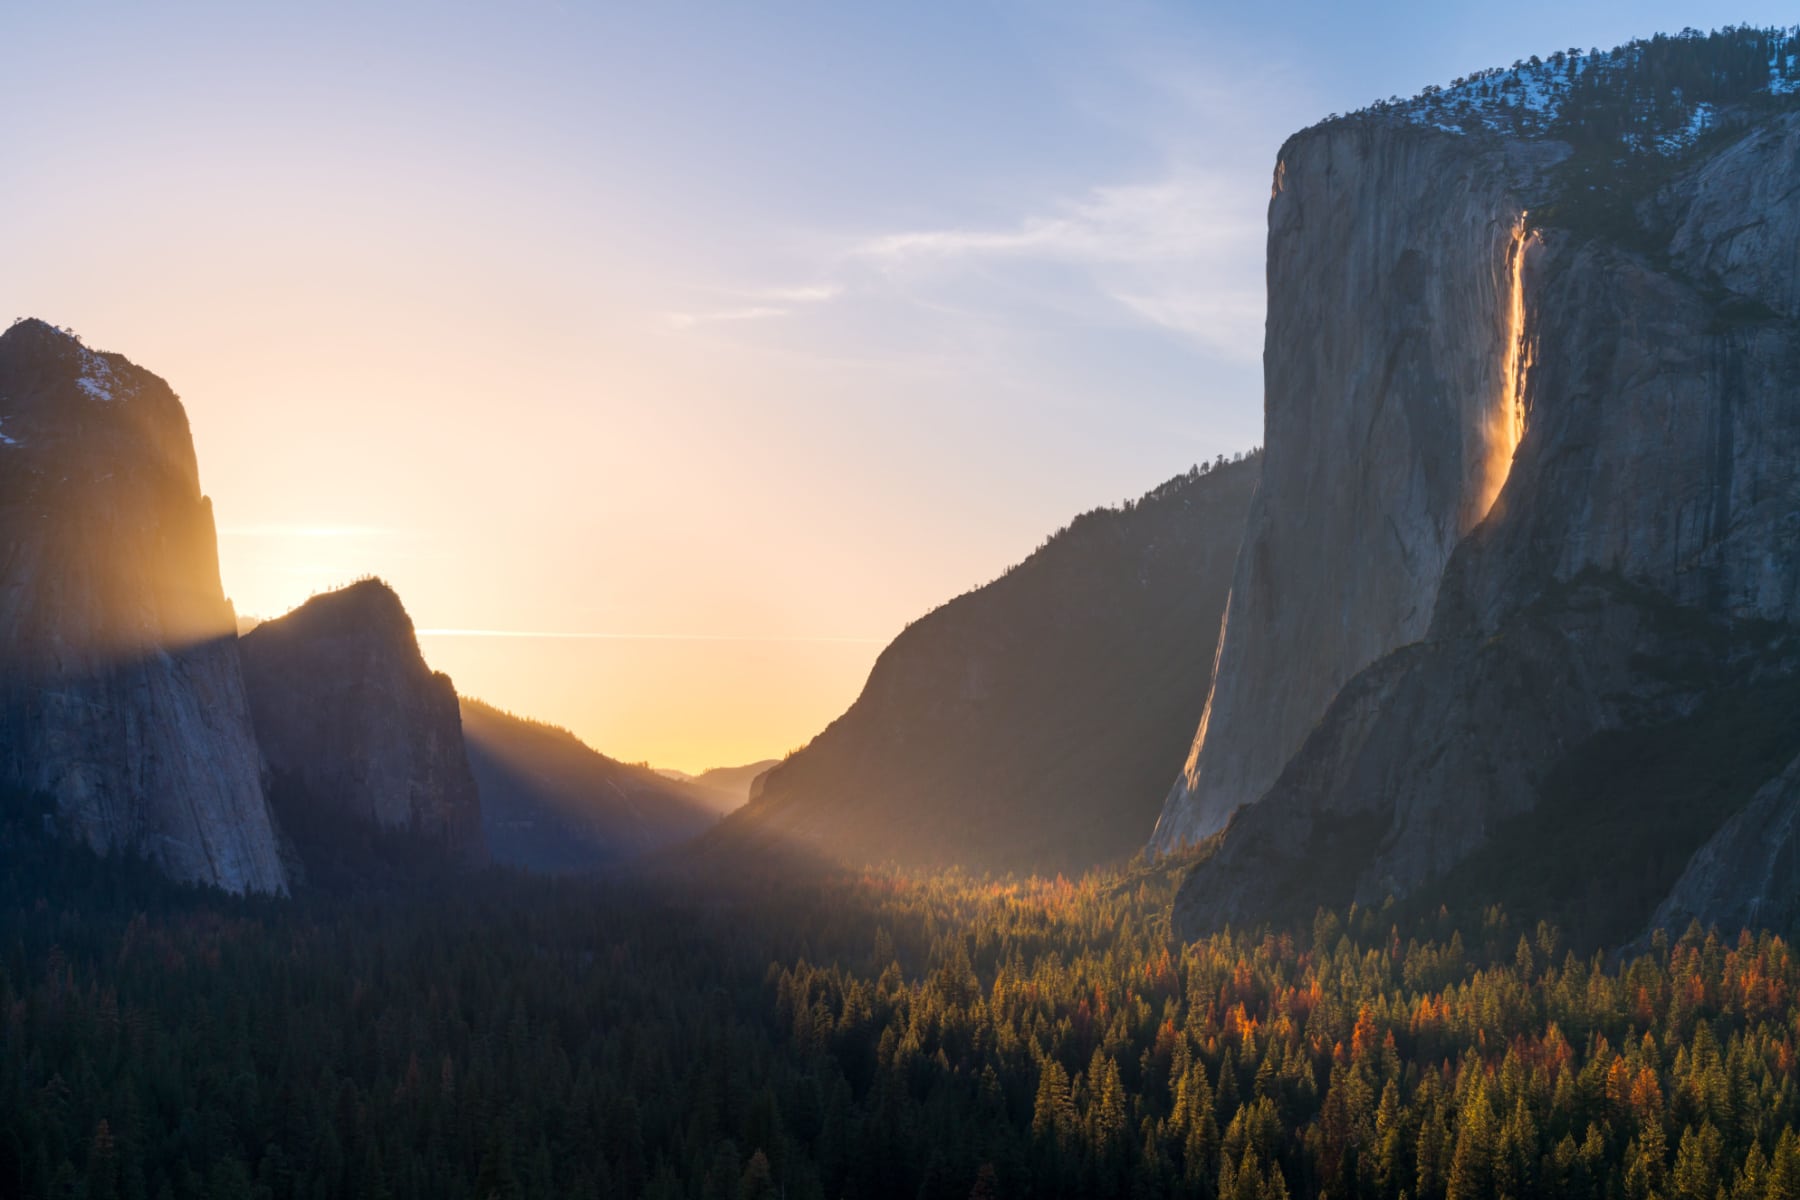 A wide shot of Yosemite Valley with the Firefall on the right side, dropping down from El Capitan.